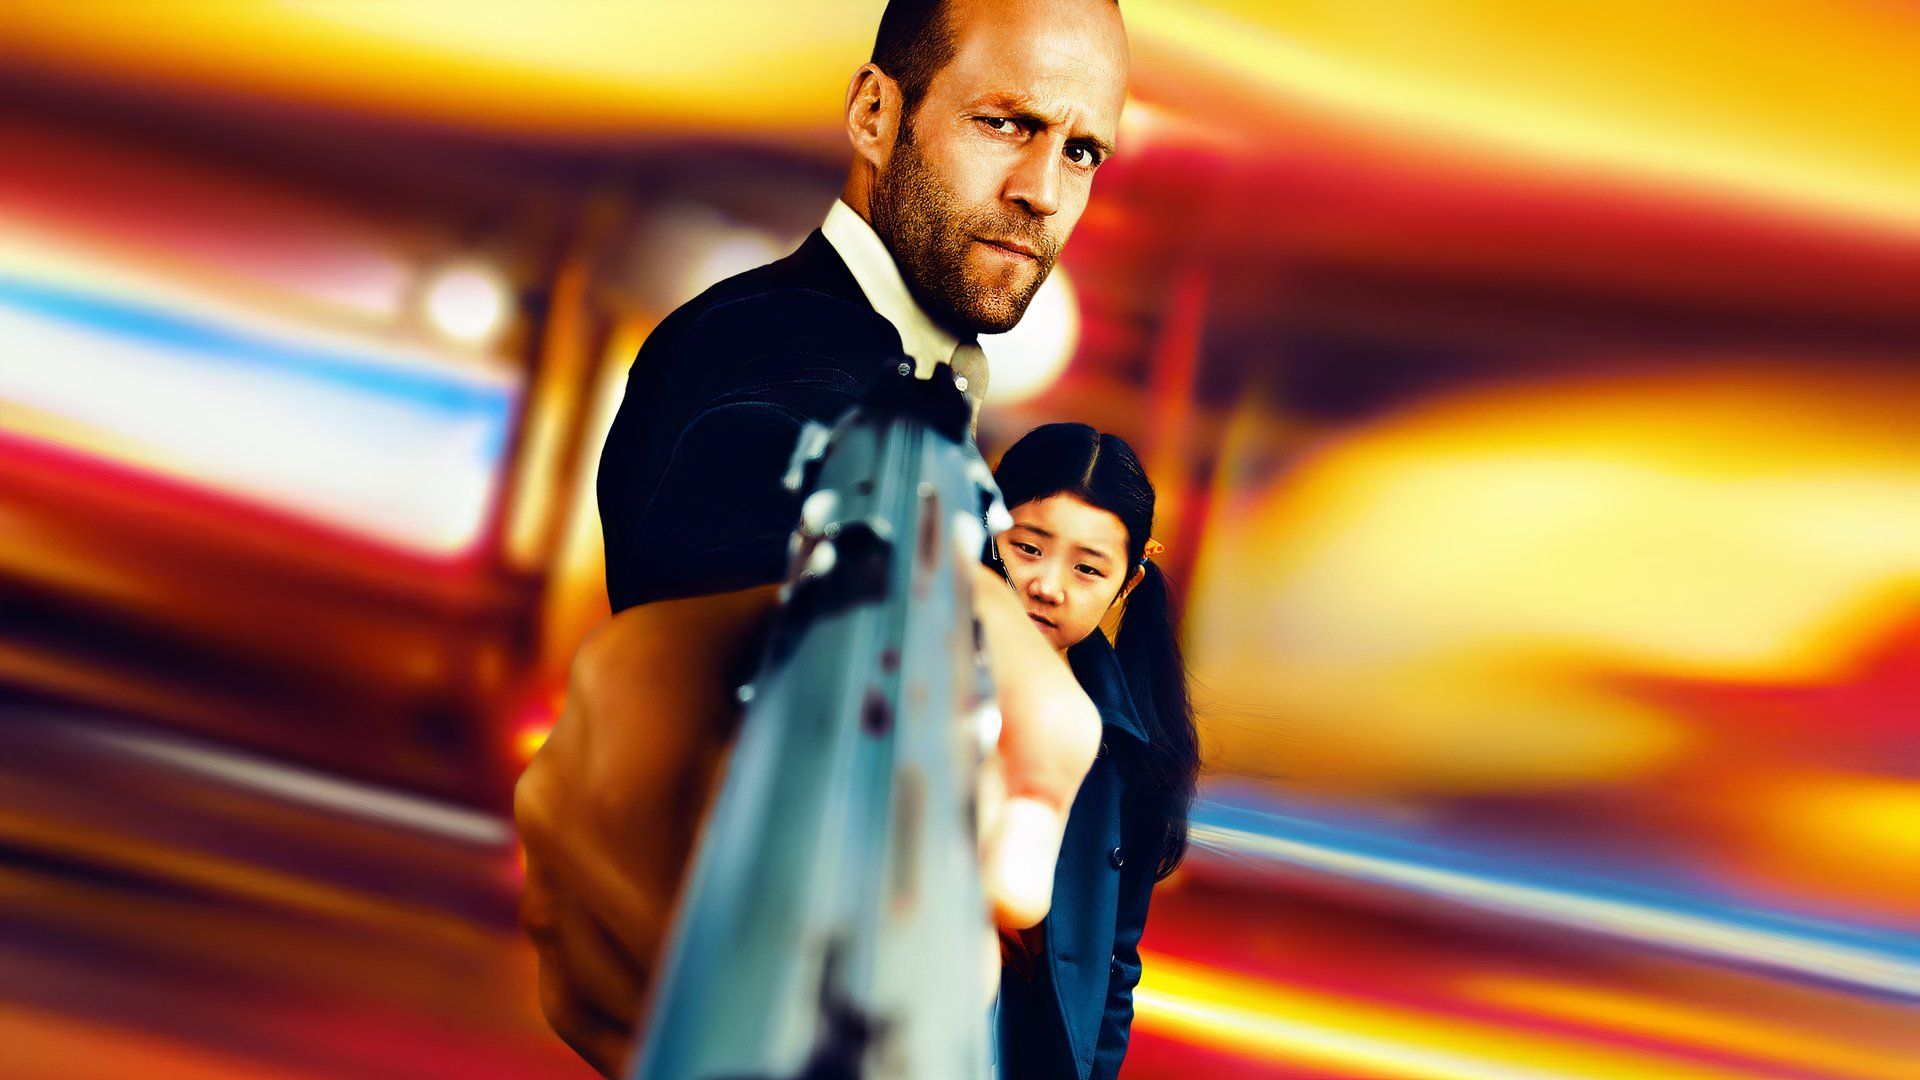 Jason Statham in Safe pointing a pistol directly at the camera with a little girl hiding behind him.